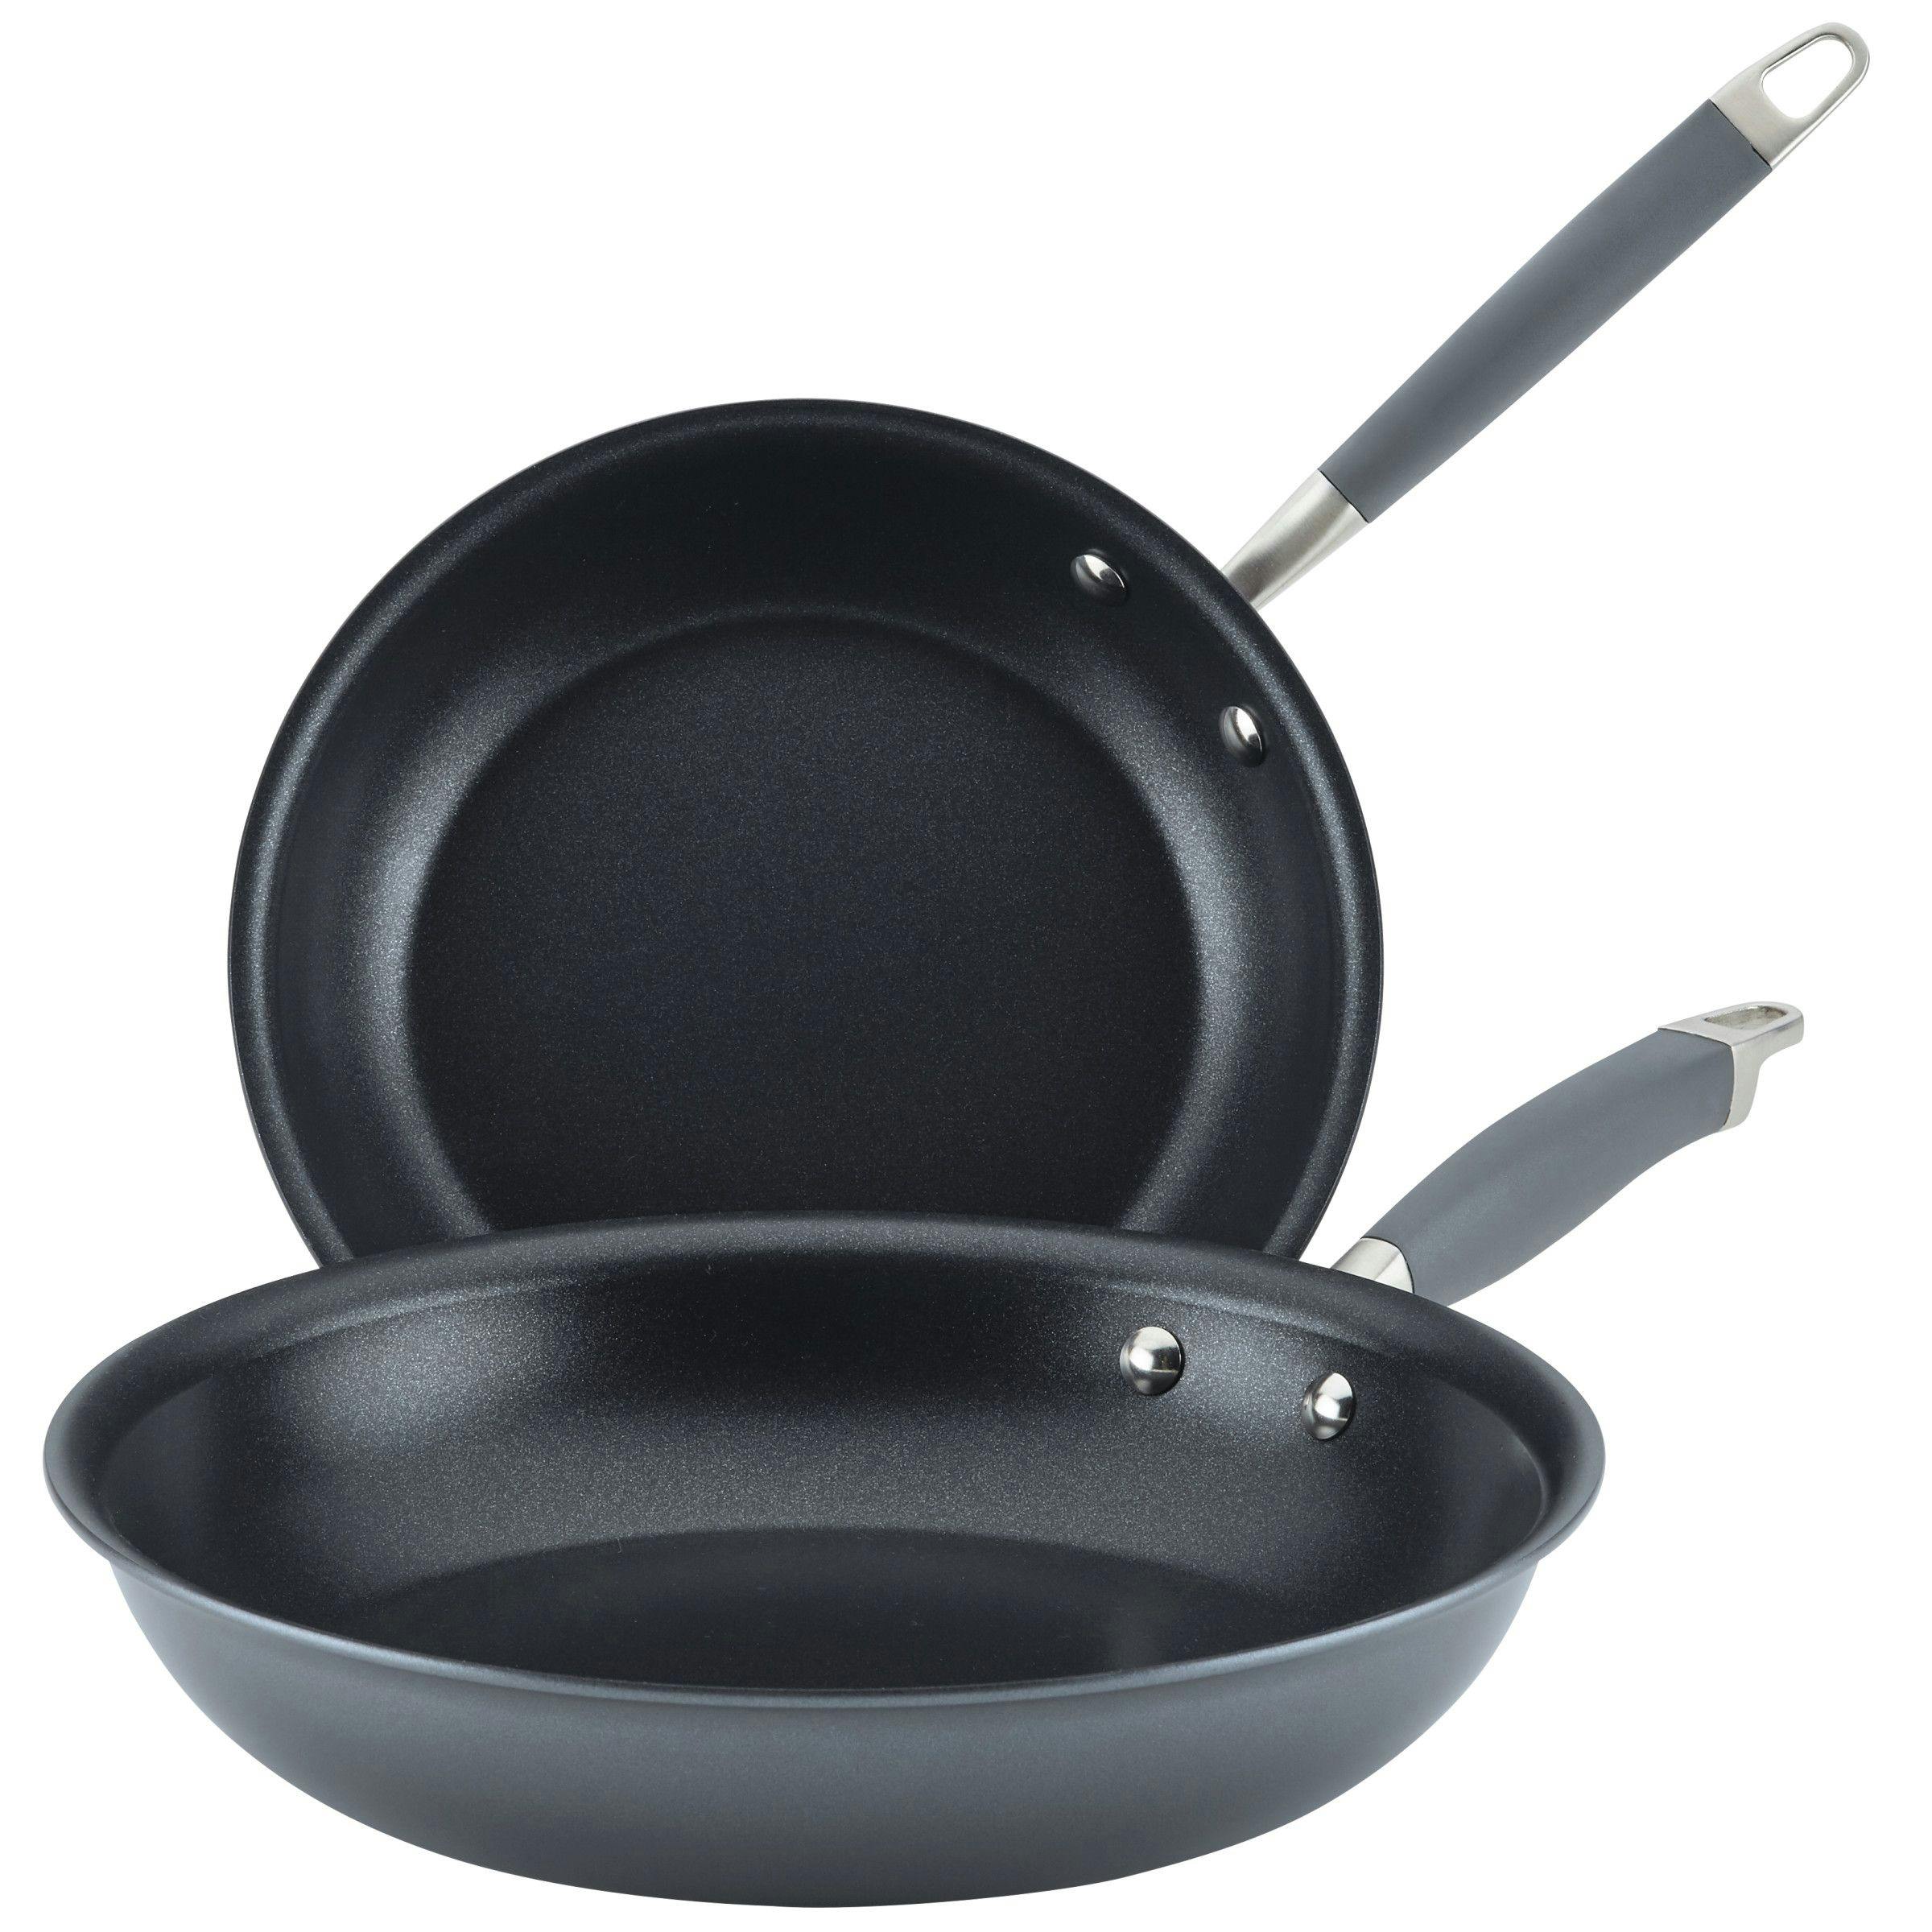 Anolon Advanced Home Hard-Anodized Nonstick Frying Pan Set, 2-Piece, Moonstone